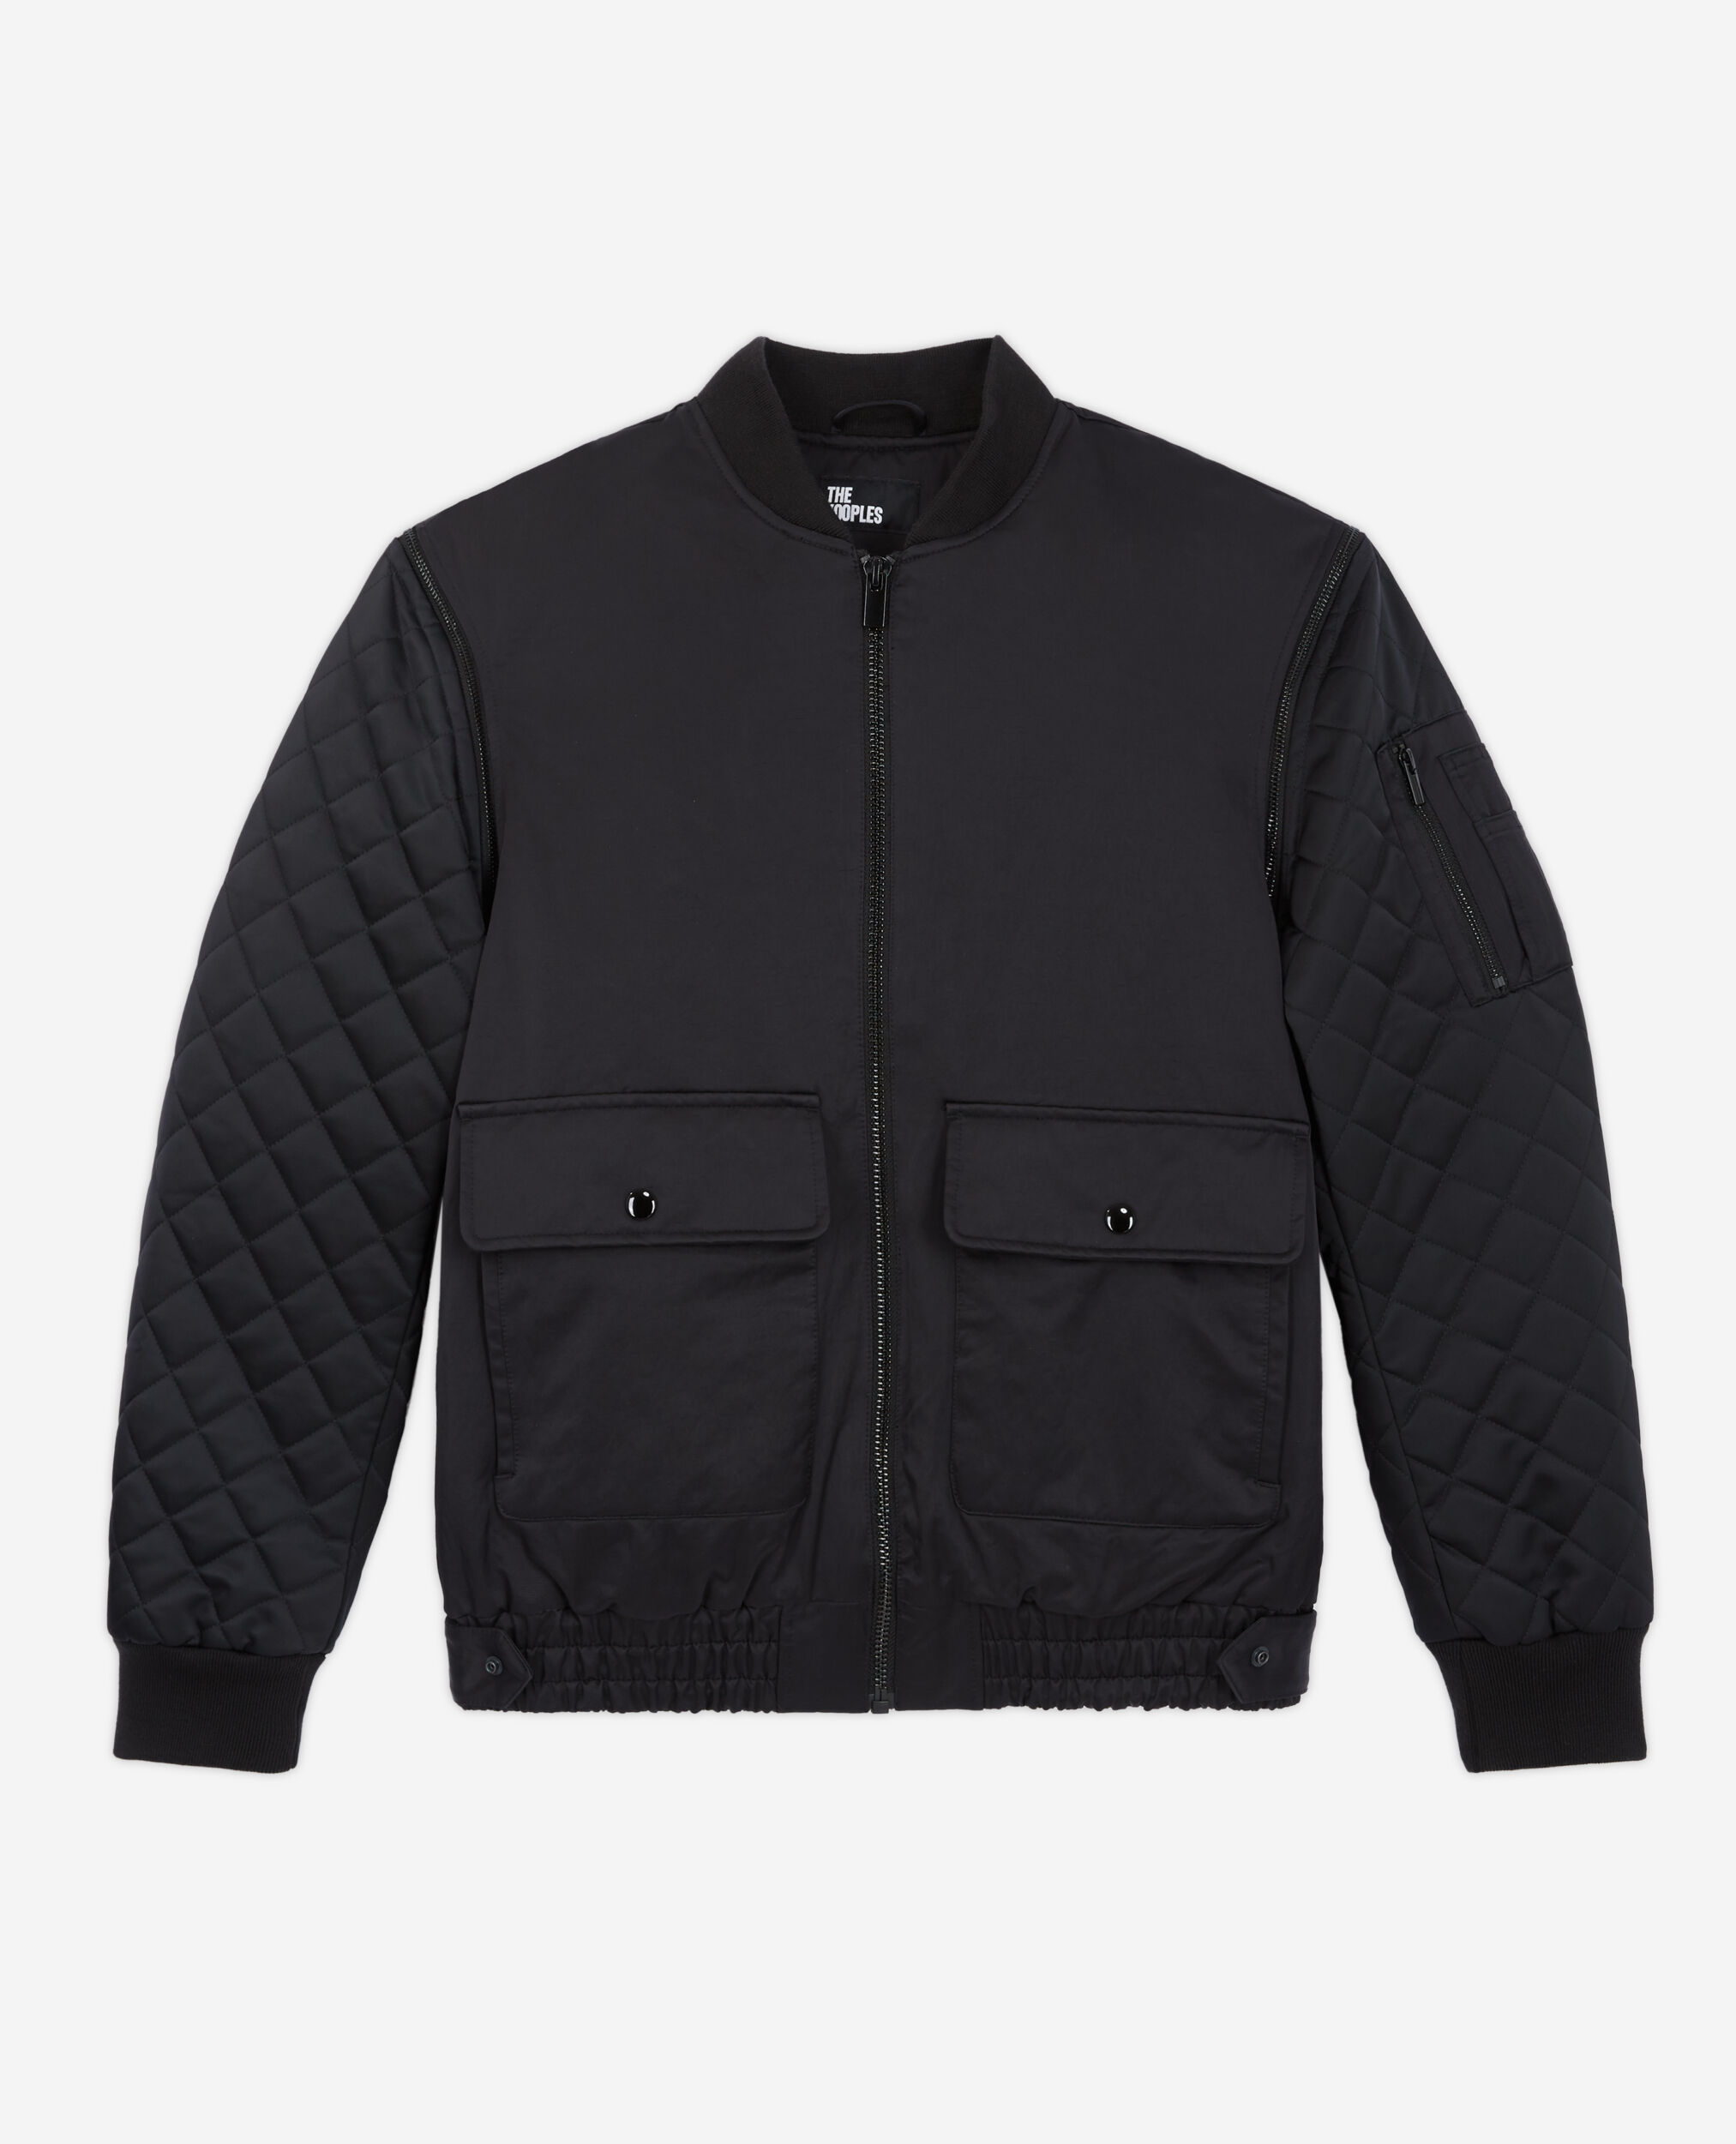 Bomber manches amovibles noir, BLACK, hi-res image number null